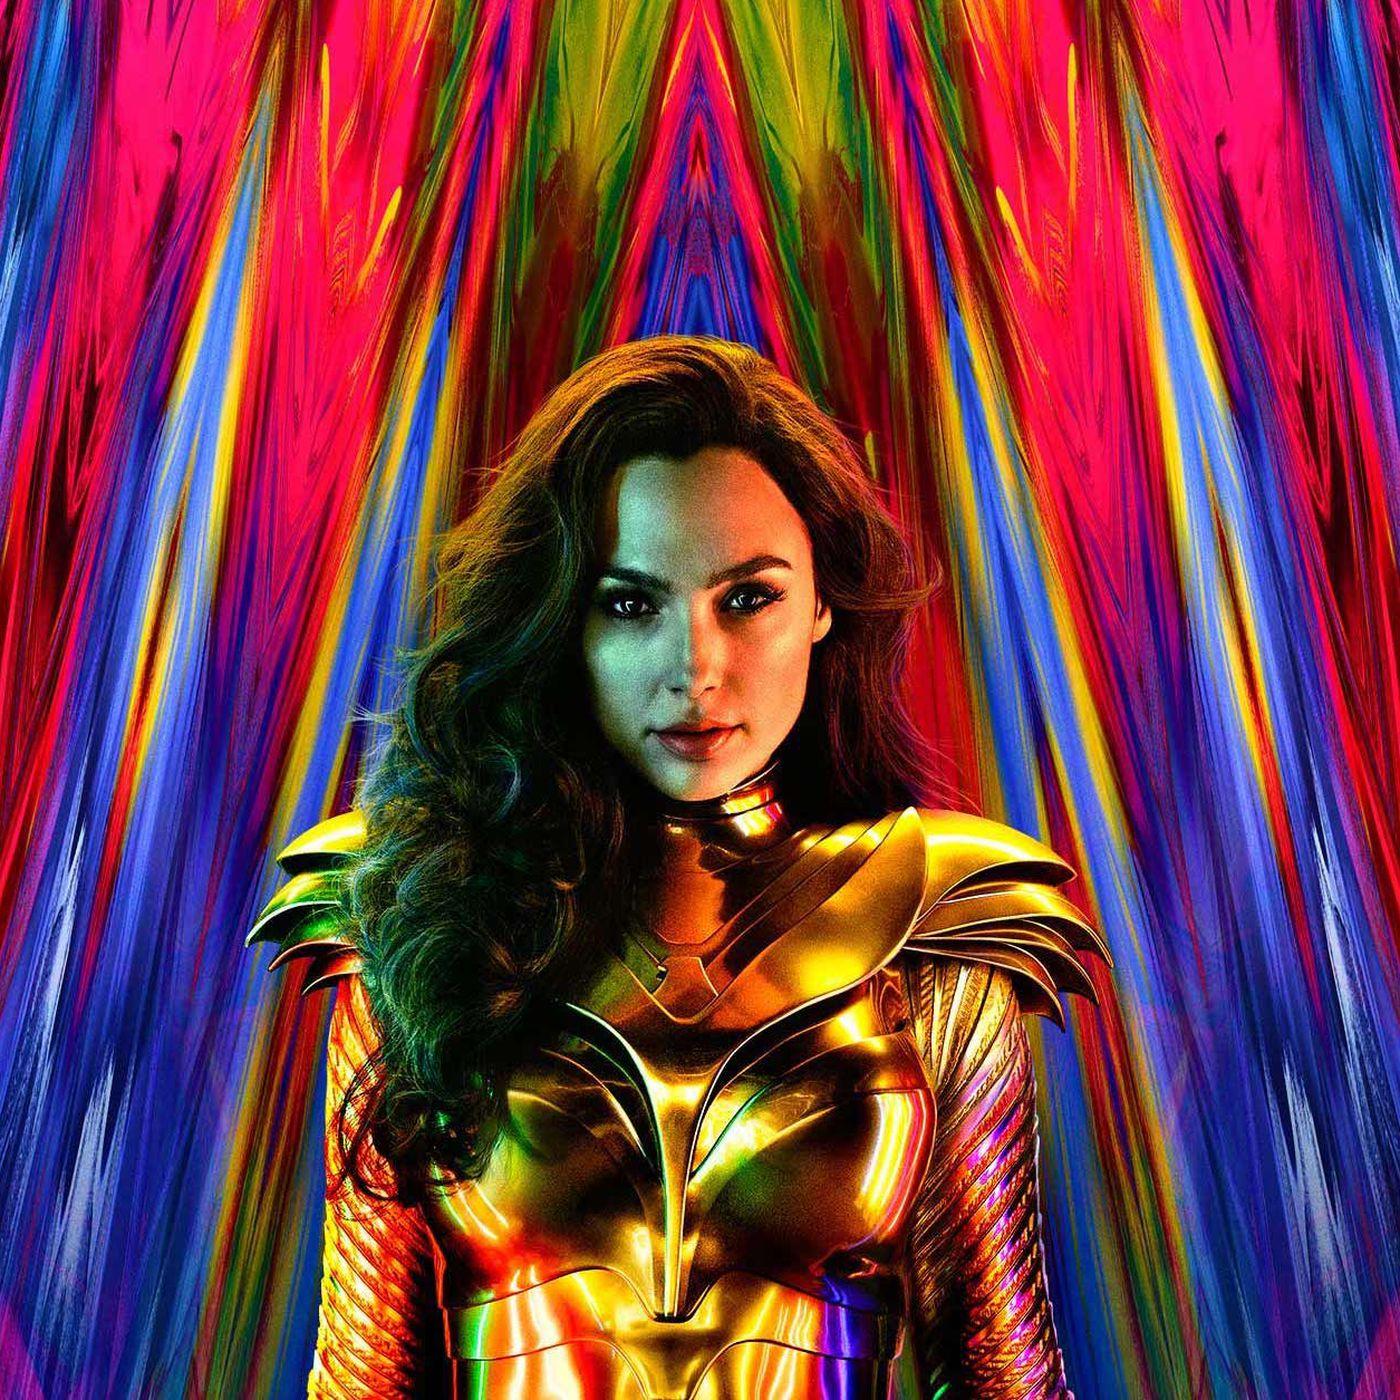 Wonder Woman director shares new poster with Gal Gadot